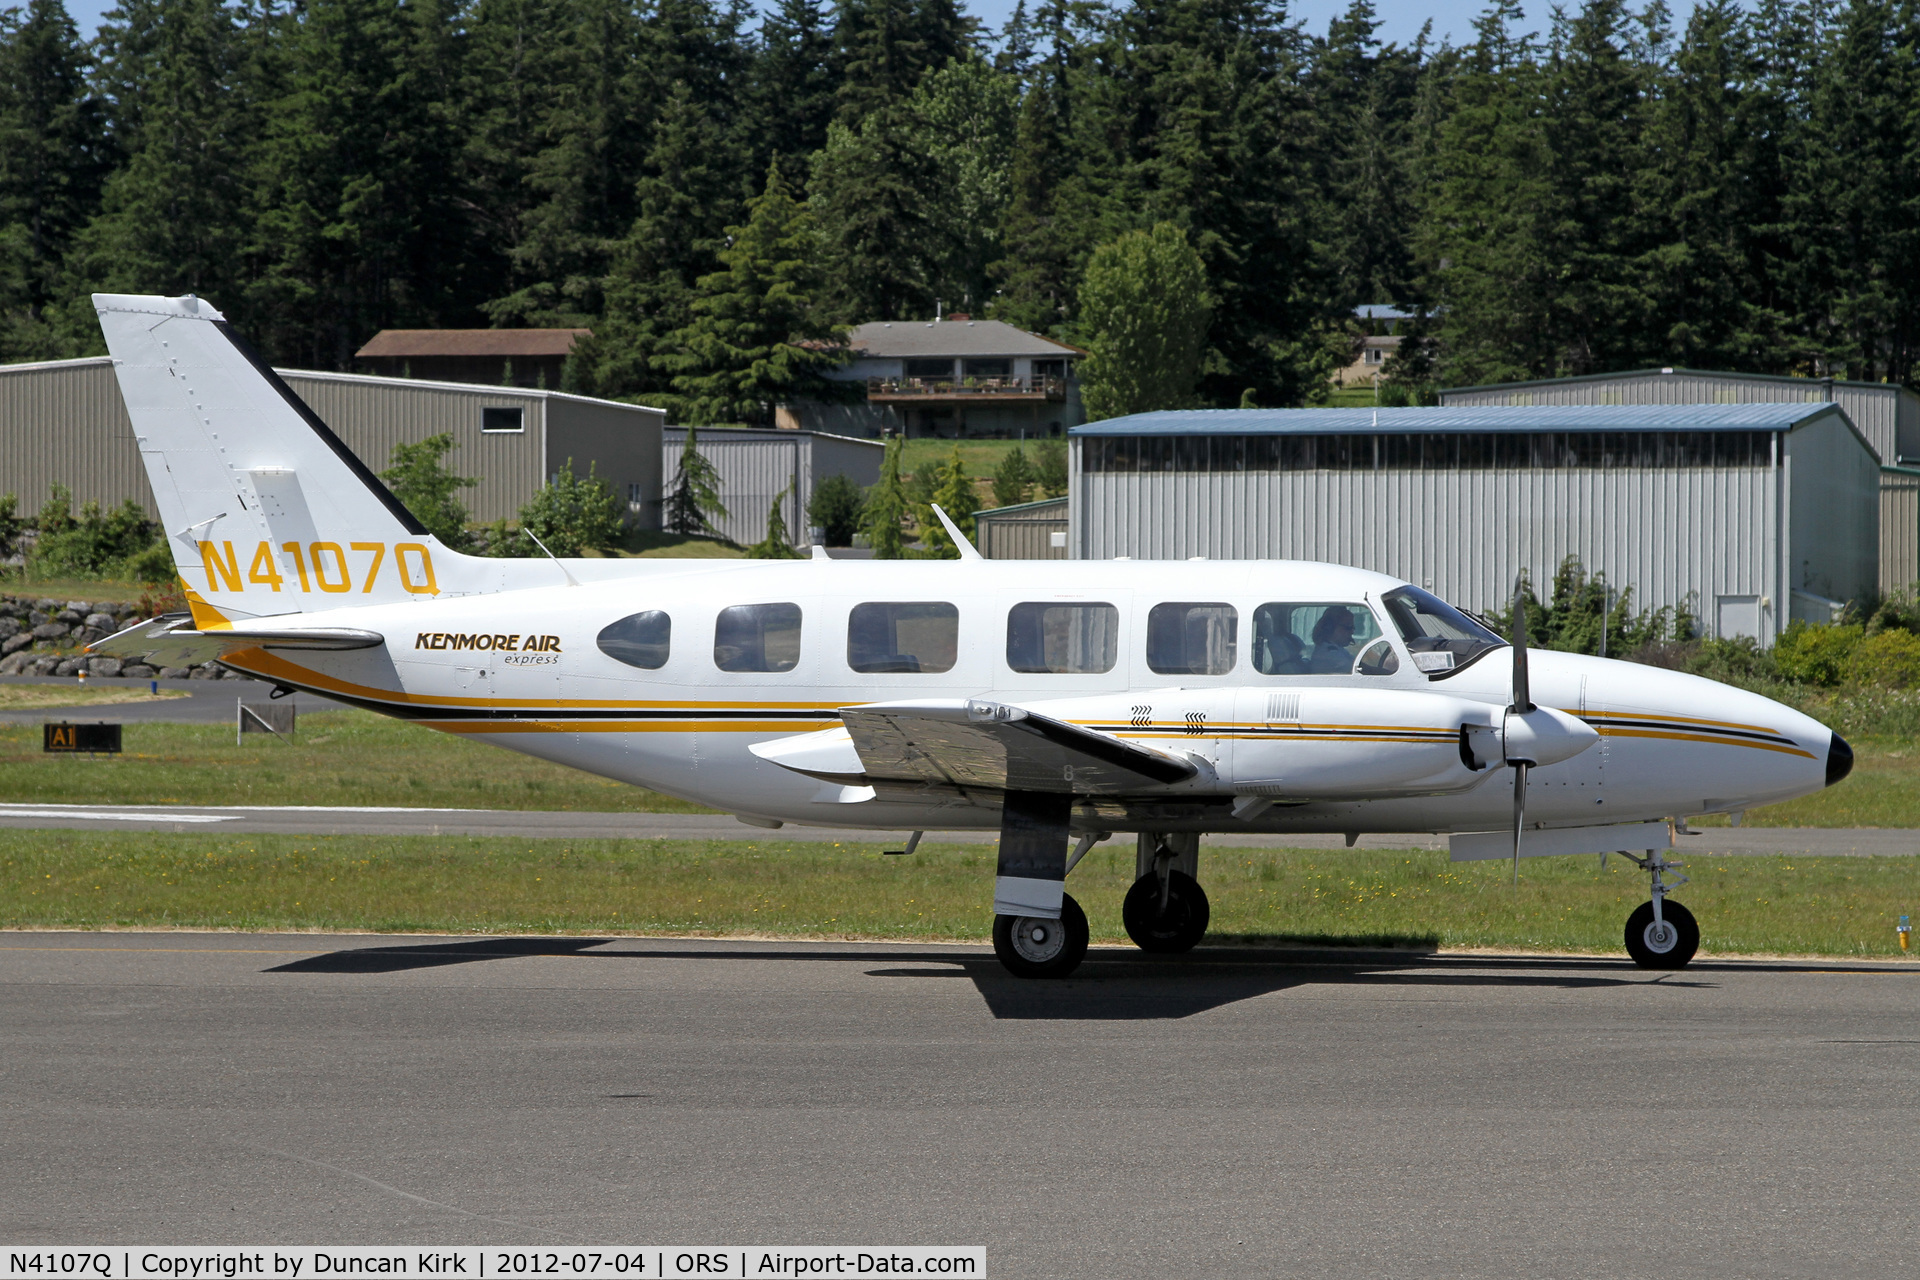 N4107Q, 1982 Piper PA-31-350 Chieftain C/N 31-8253008, Kenmore Air Express arrival from Beoing Field